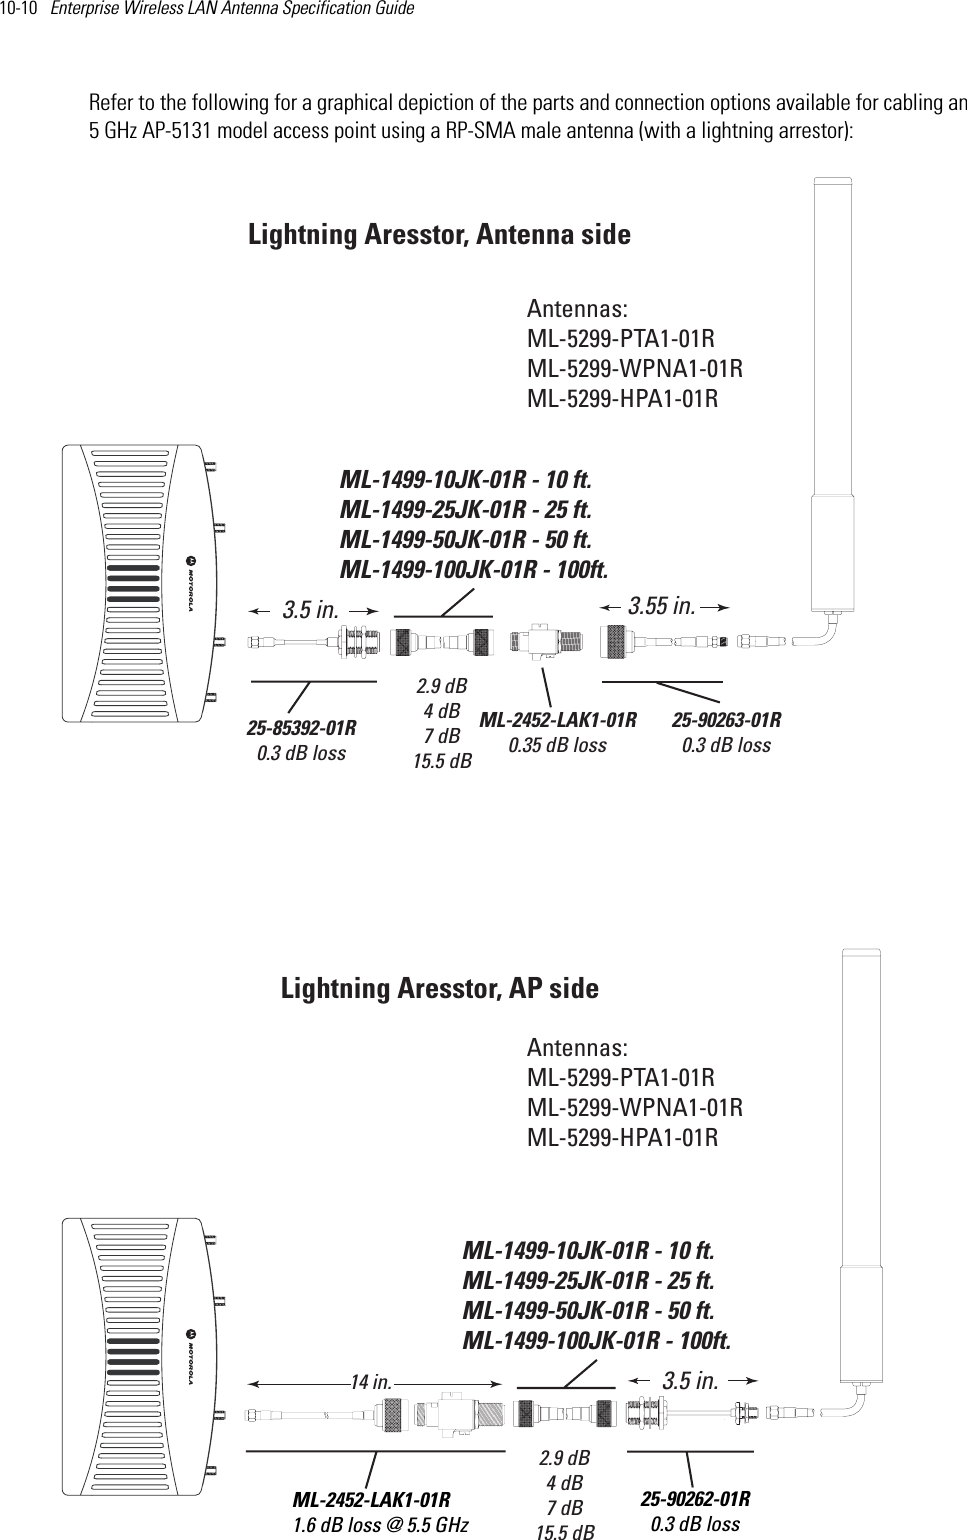 10-10   Enterprise Wireless LAN Antenna Specification Guide Refer to the following for a graphical depiction of the parts and connection options available for cabling an 5 GHz AP-5131 model access point using a RP-SMA male antenna (with a lightning arrestor):  Antennas:ML-5299-PTA1-01RML-5299-WPNA1-01RML-5299-HPA1-01RAntennas:ML-5299-PTA1-01RML-5299-WPNA1-01RML-5299-HPA1-01RML-2452-LAK1-01R0.35 dB lossLightning Aresstor, AP sideLightning Aresstor, Antenna sideML-1499-10JK-01R - 10 ft.ML-1499-25JK-01R - 25 ft.ML-1499-50JK-01R - 50 ft.ML-1499-100JK-01R - 100ft. 2.9 dB4 dB7 dB15.5 dBML-1499-10JK-01R - 10 ft.ML-1499-25JK-01R - 25 ft.ML-1499-50JK-01R - 50 ft.ML-1499-100JK-01R - 100ft. 2.9 dB4 dB7 dB15.5 dBML-2452-LAK1-01R1.6 dB loss @ 5.5 GHz14 in.  25-90262-01R0.3 dB loss3.5 in.25-90263-01R0.3 dB loss3.55 in.25-85392-01R0.3 dB loss3.5 in.